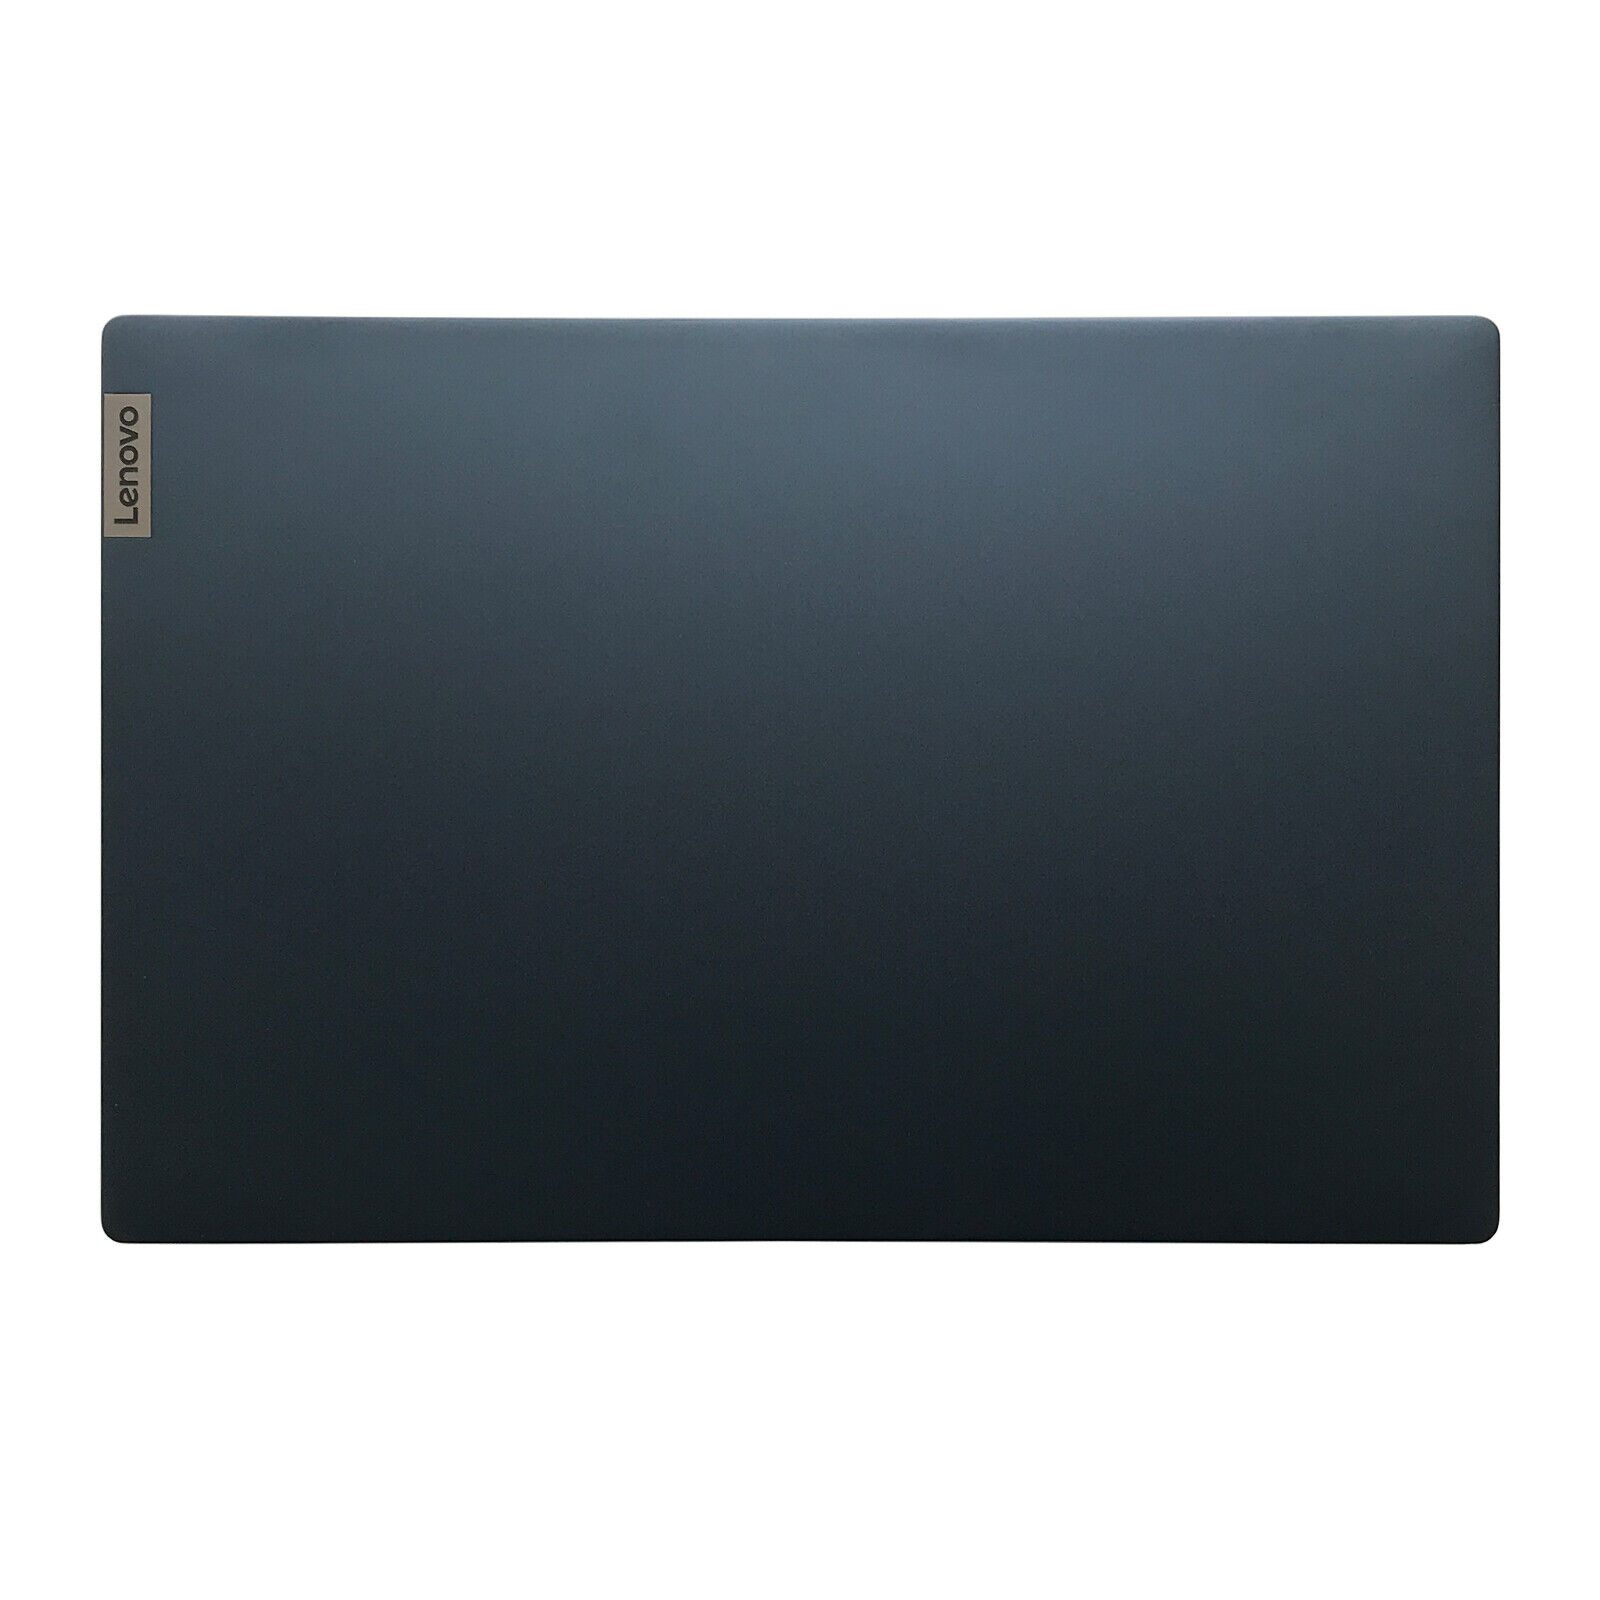 New For Lenovo ideapad 5 15IIL05 15ARE05 15ITL05 LCD Back Cover/Bezel/Hinges US